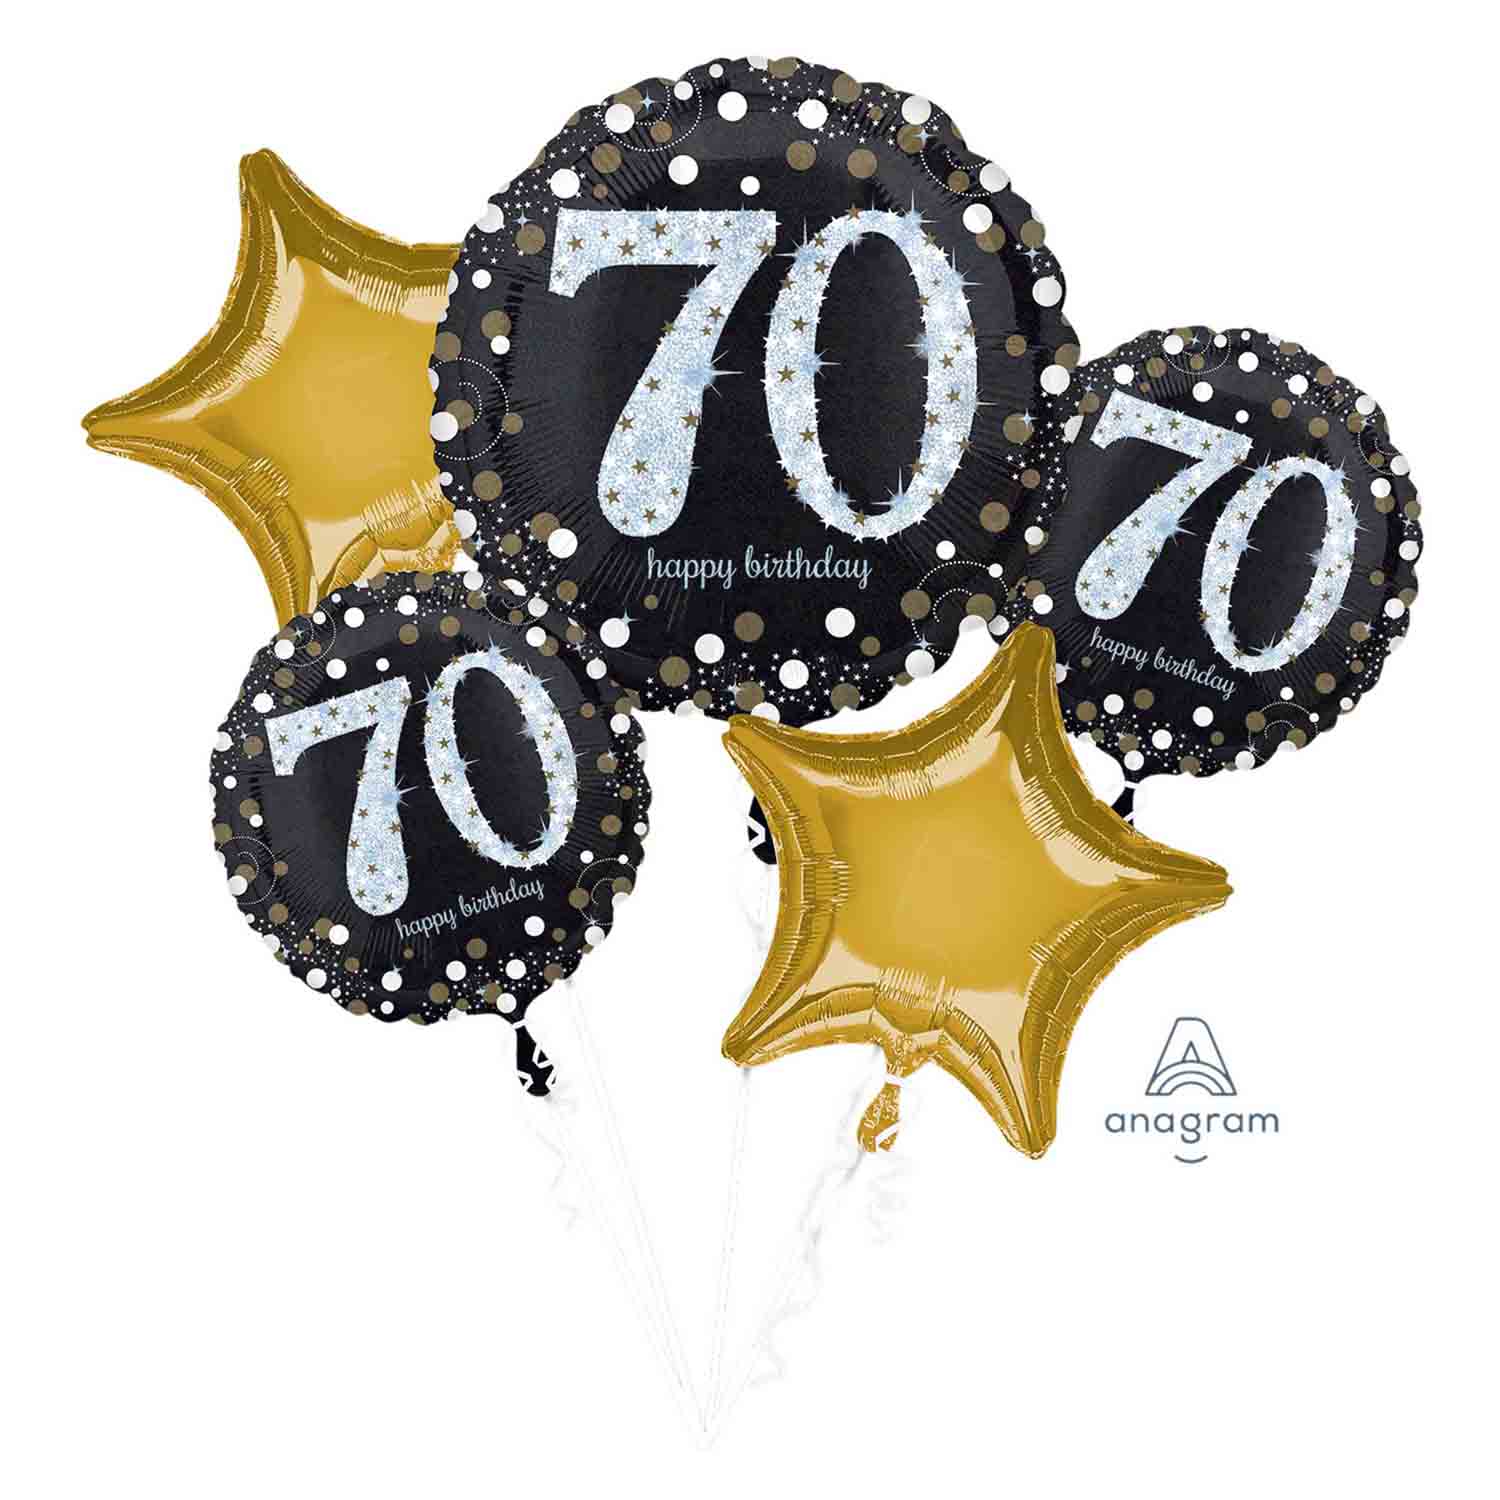 Turning 70 is a milestone worth celebrating, and our exquisite party decor is here to make any 70th, a special day that will be unforgettable! 